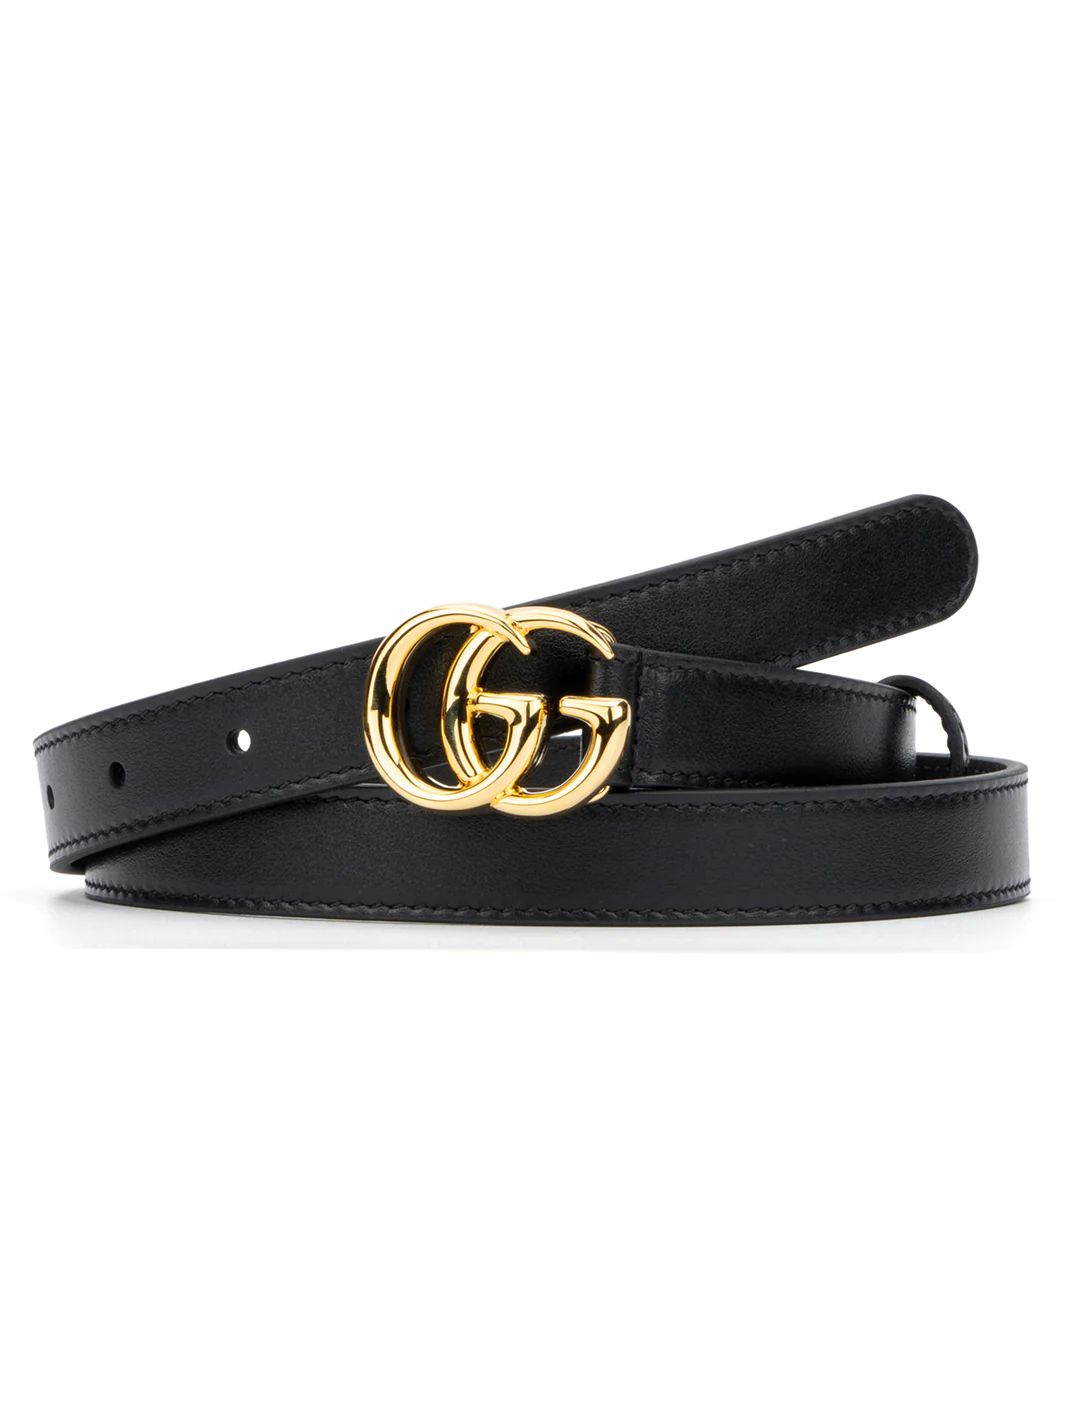 Gucci GG Marmont Belt .75" in Black 80 Lord & Taylor | Lord & Taylor